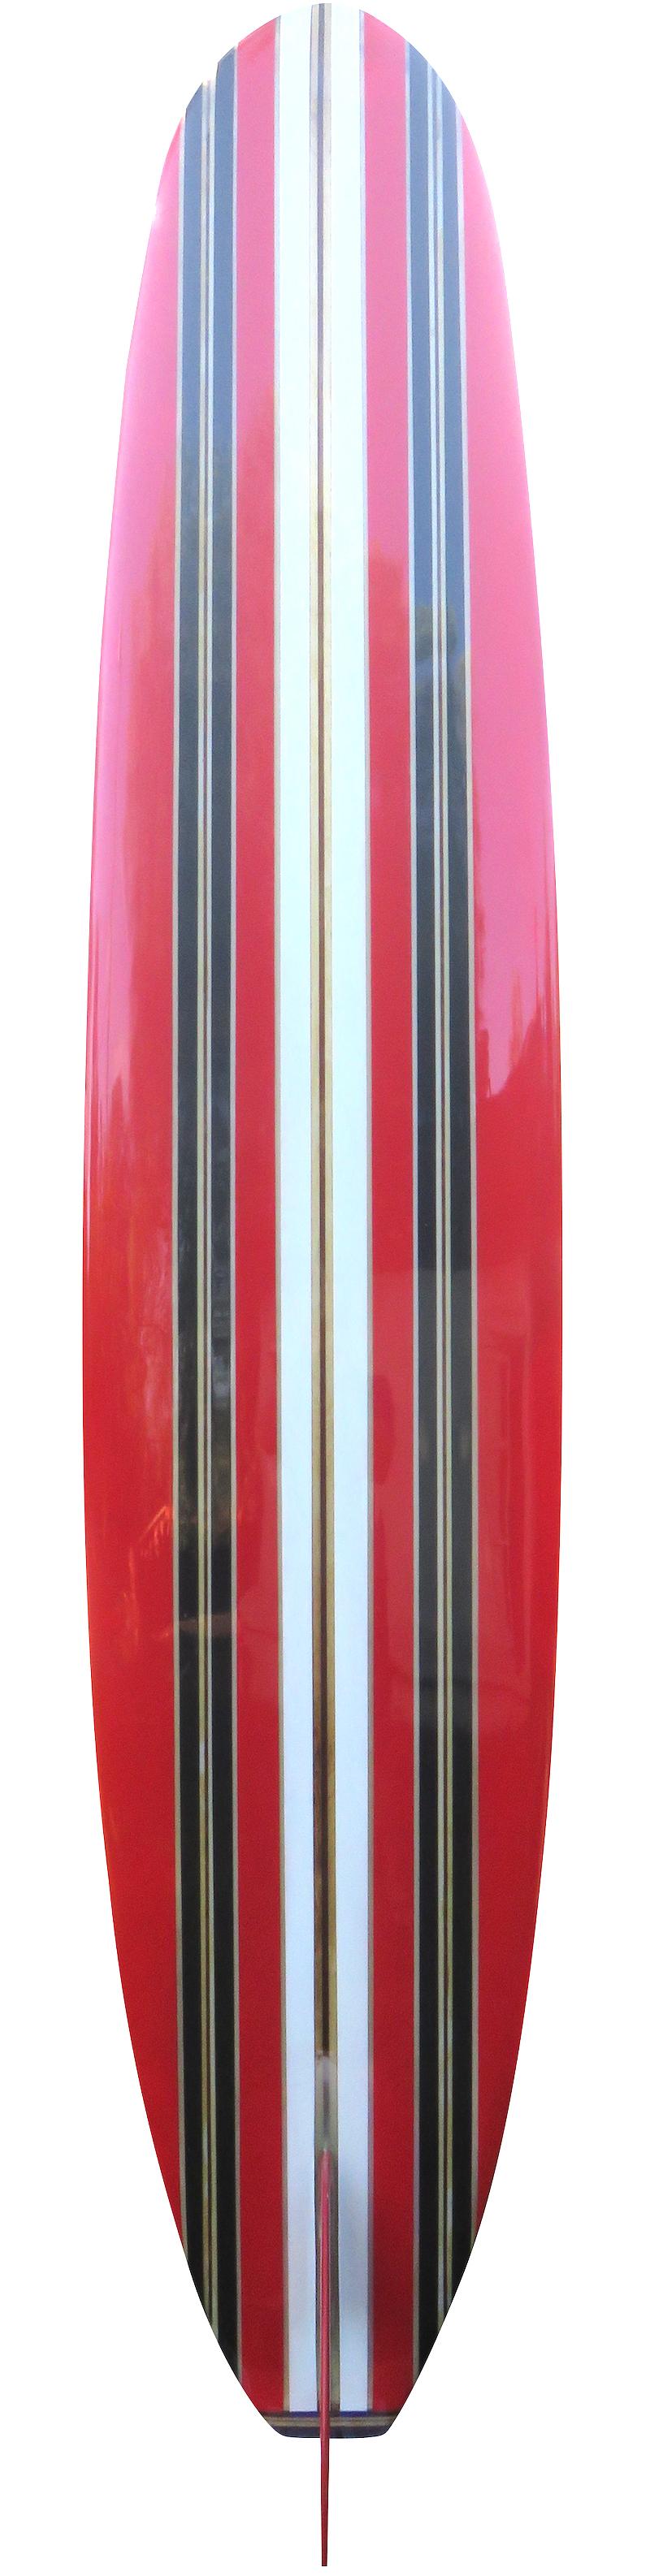 Early 1960s Dewey Weber longboard surfboard. Features beautiful tri-color panels with balsa and redwood reverse t-band center stringer, redwood outer stringers, and 5-piece wooden tail block. A superb example of a classic 1960s vintage longboard